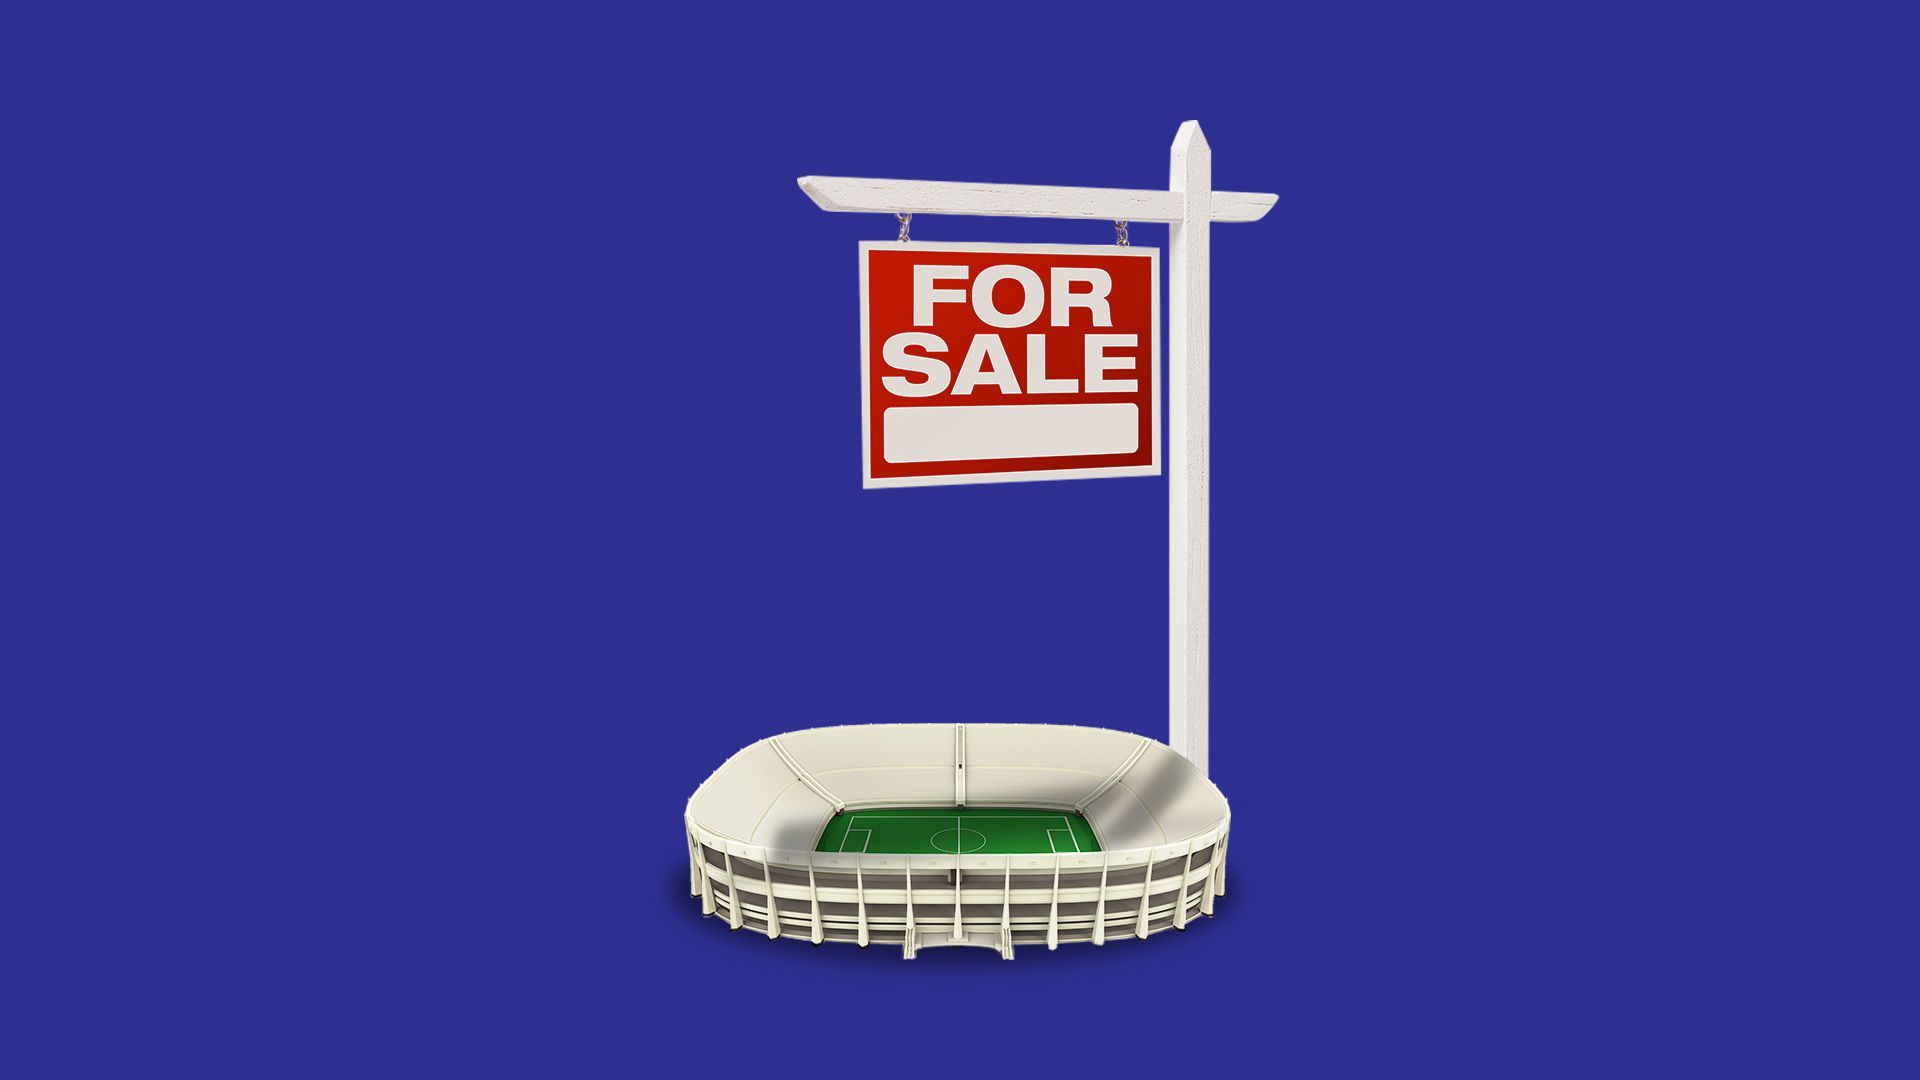 Illustration of a tiny stadium being overshadowed by a large For Sale sign